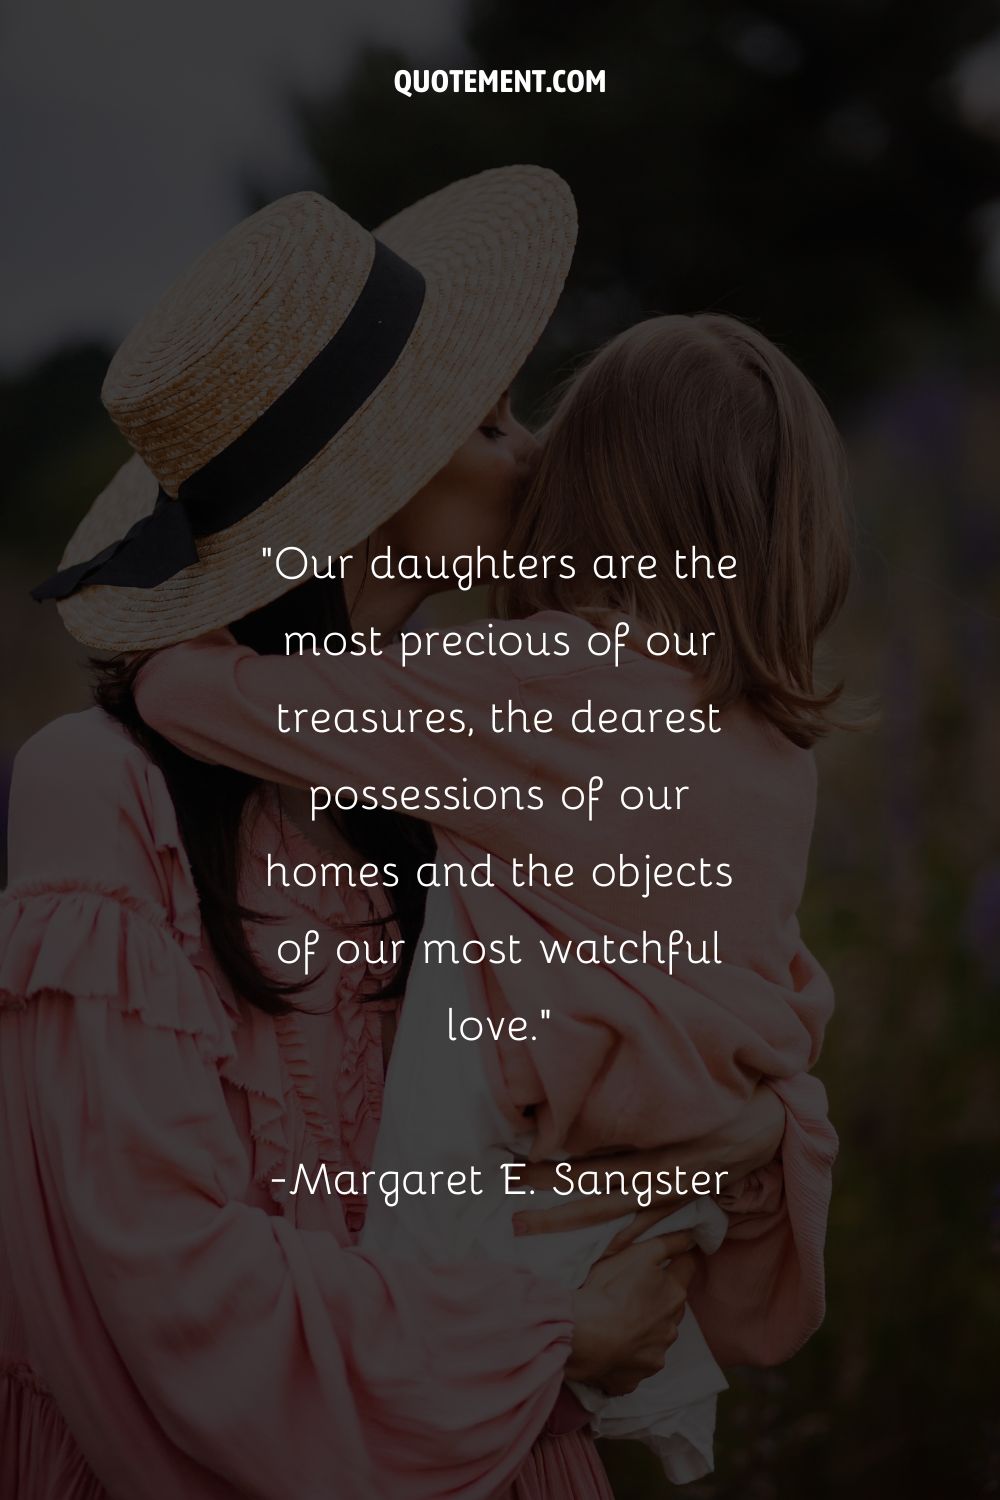 A woman kissing the forehead of a young girl representing an inspiring mom daughter quote